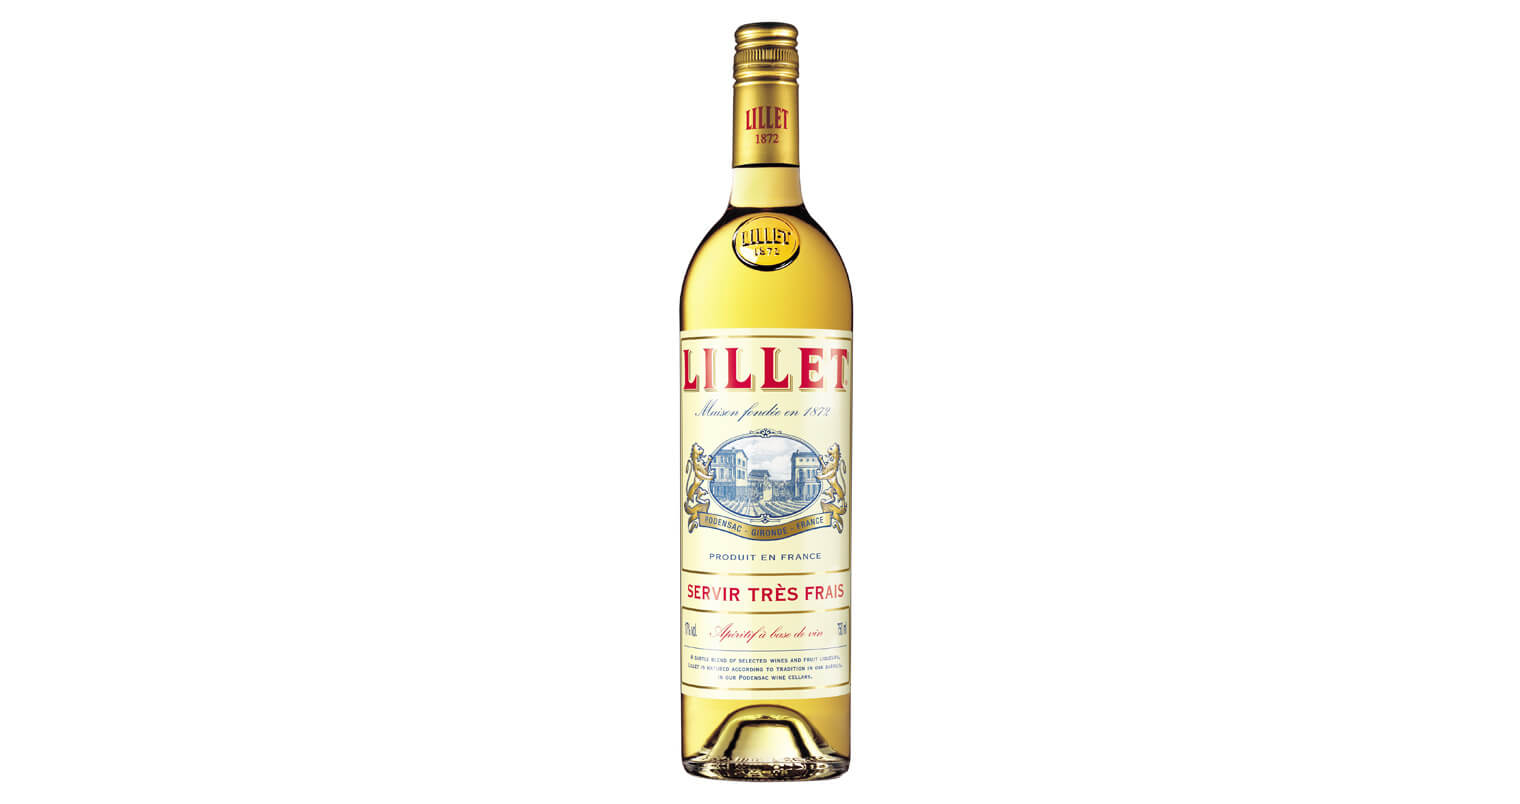 Lillet to Join Pernod Ricard USA Portfolio in 2016